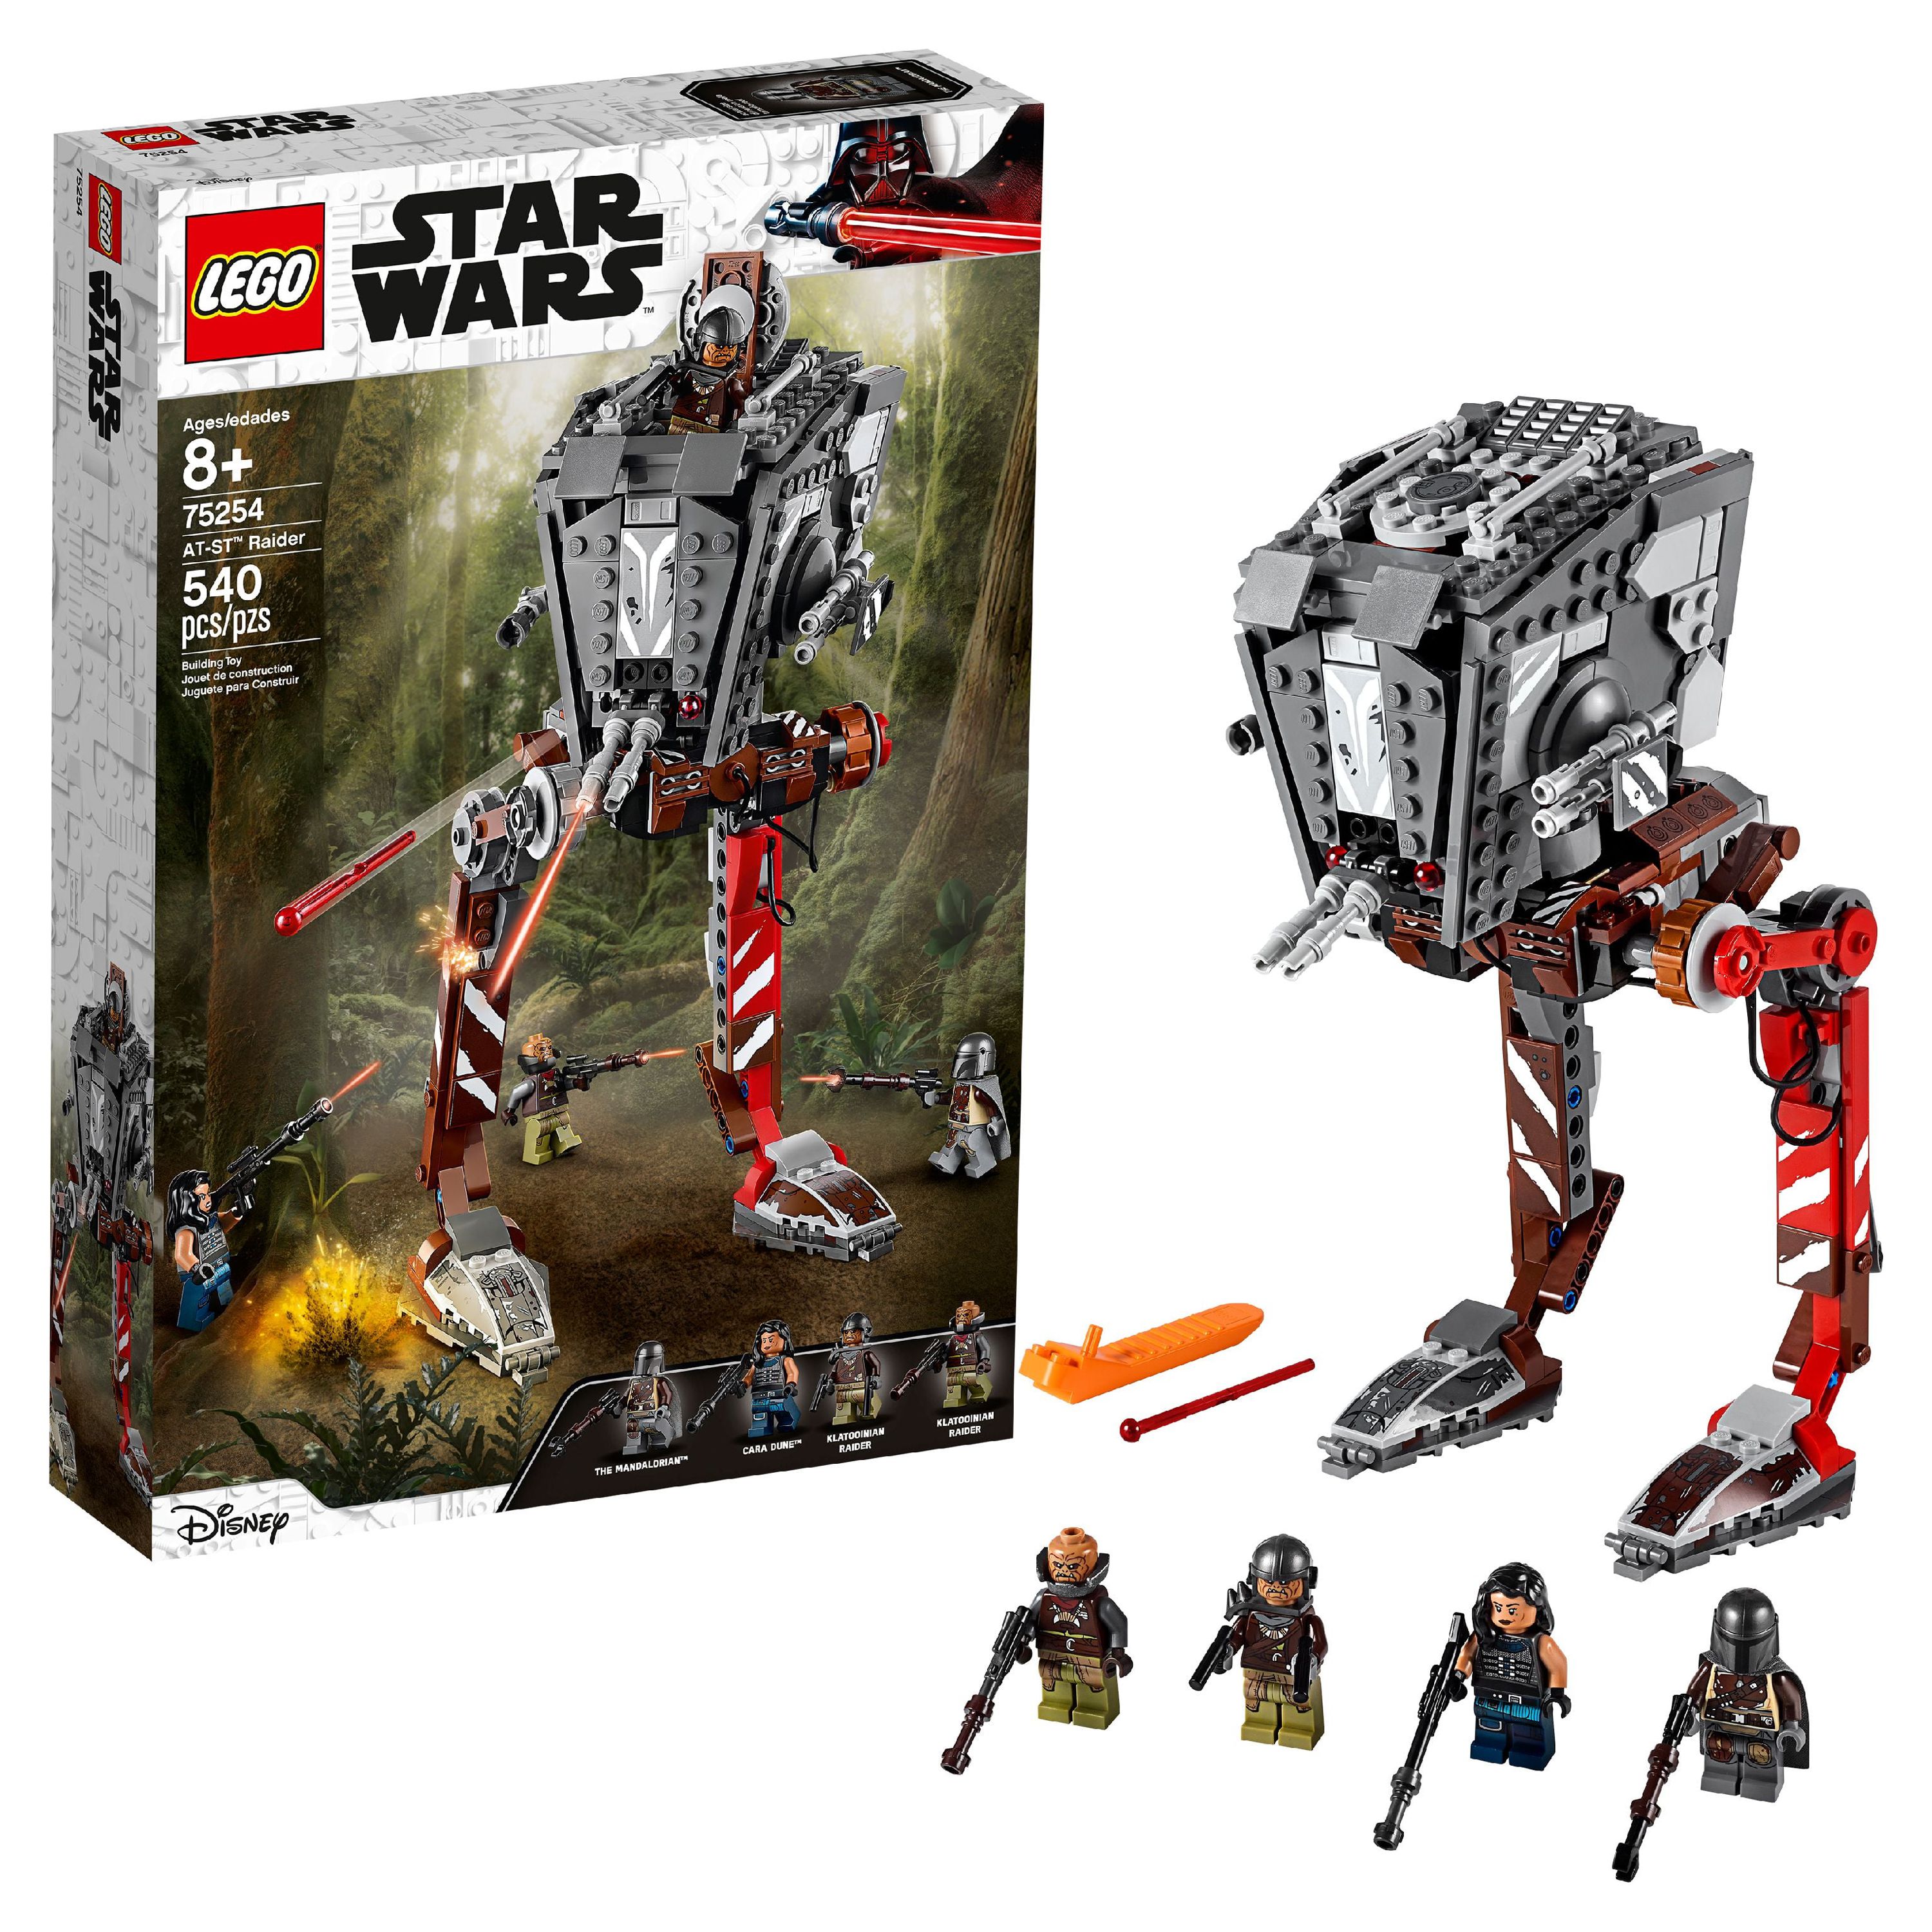 LEGO Star Wars AT-ST Raider 75254 Building Set (540 Pieces) - image 1 of 8